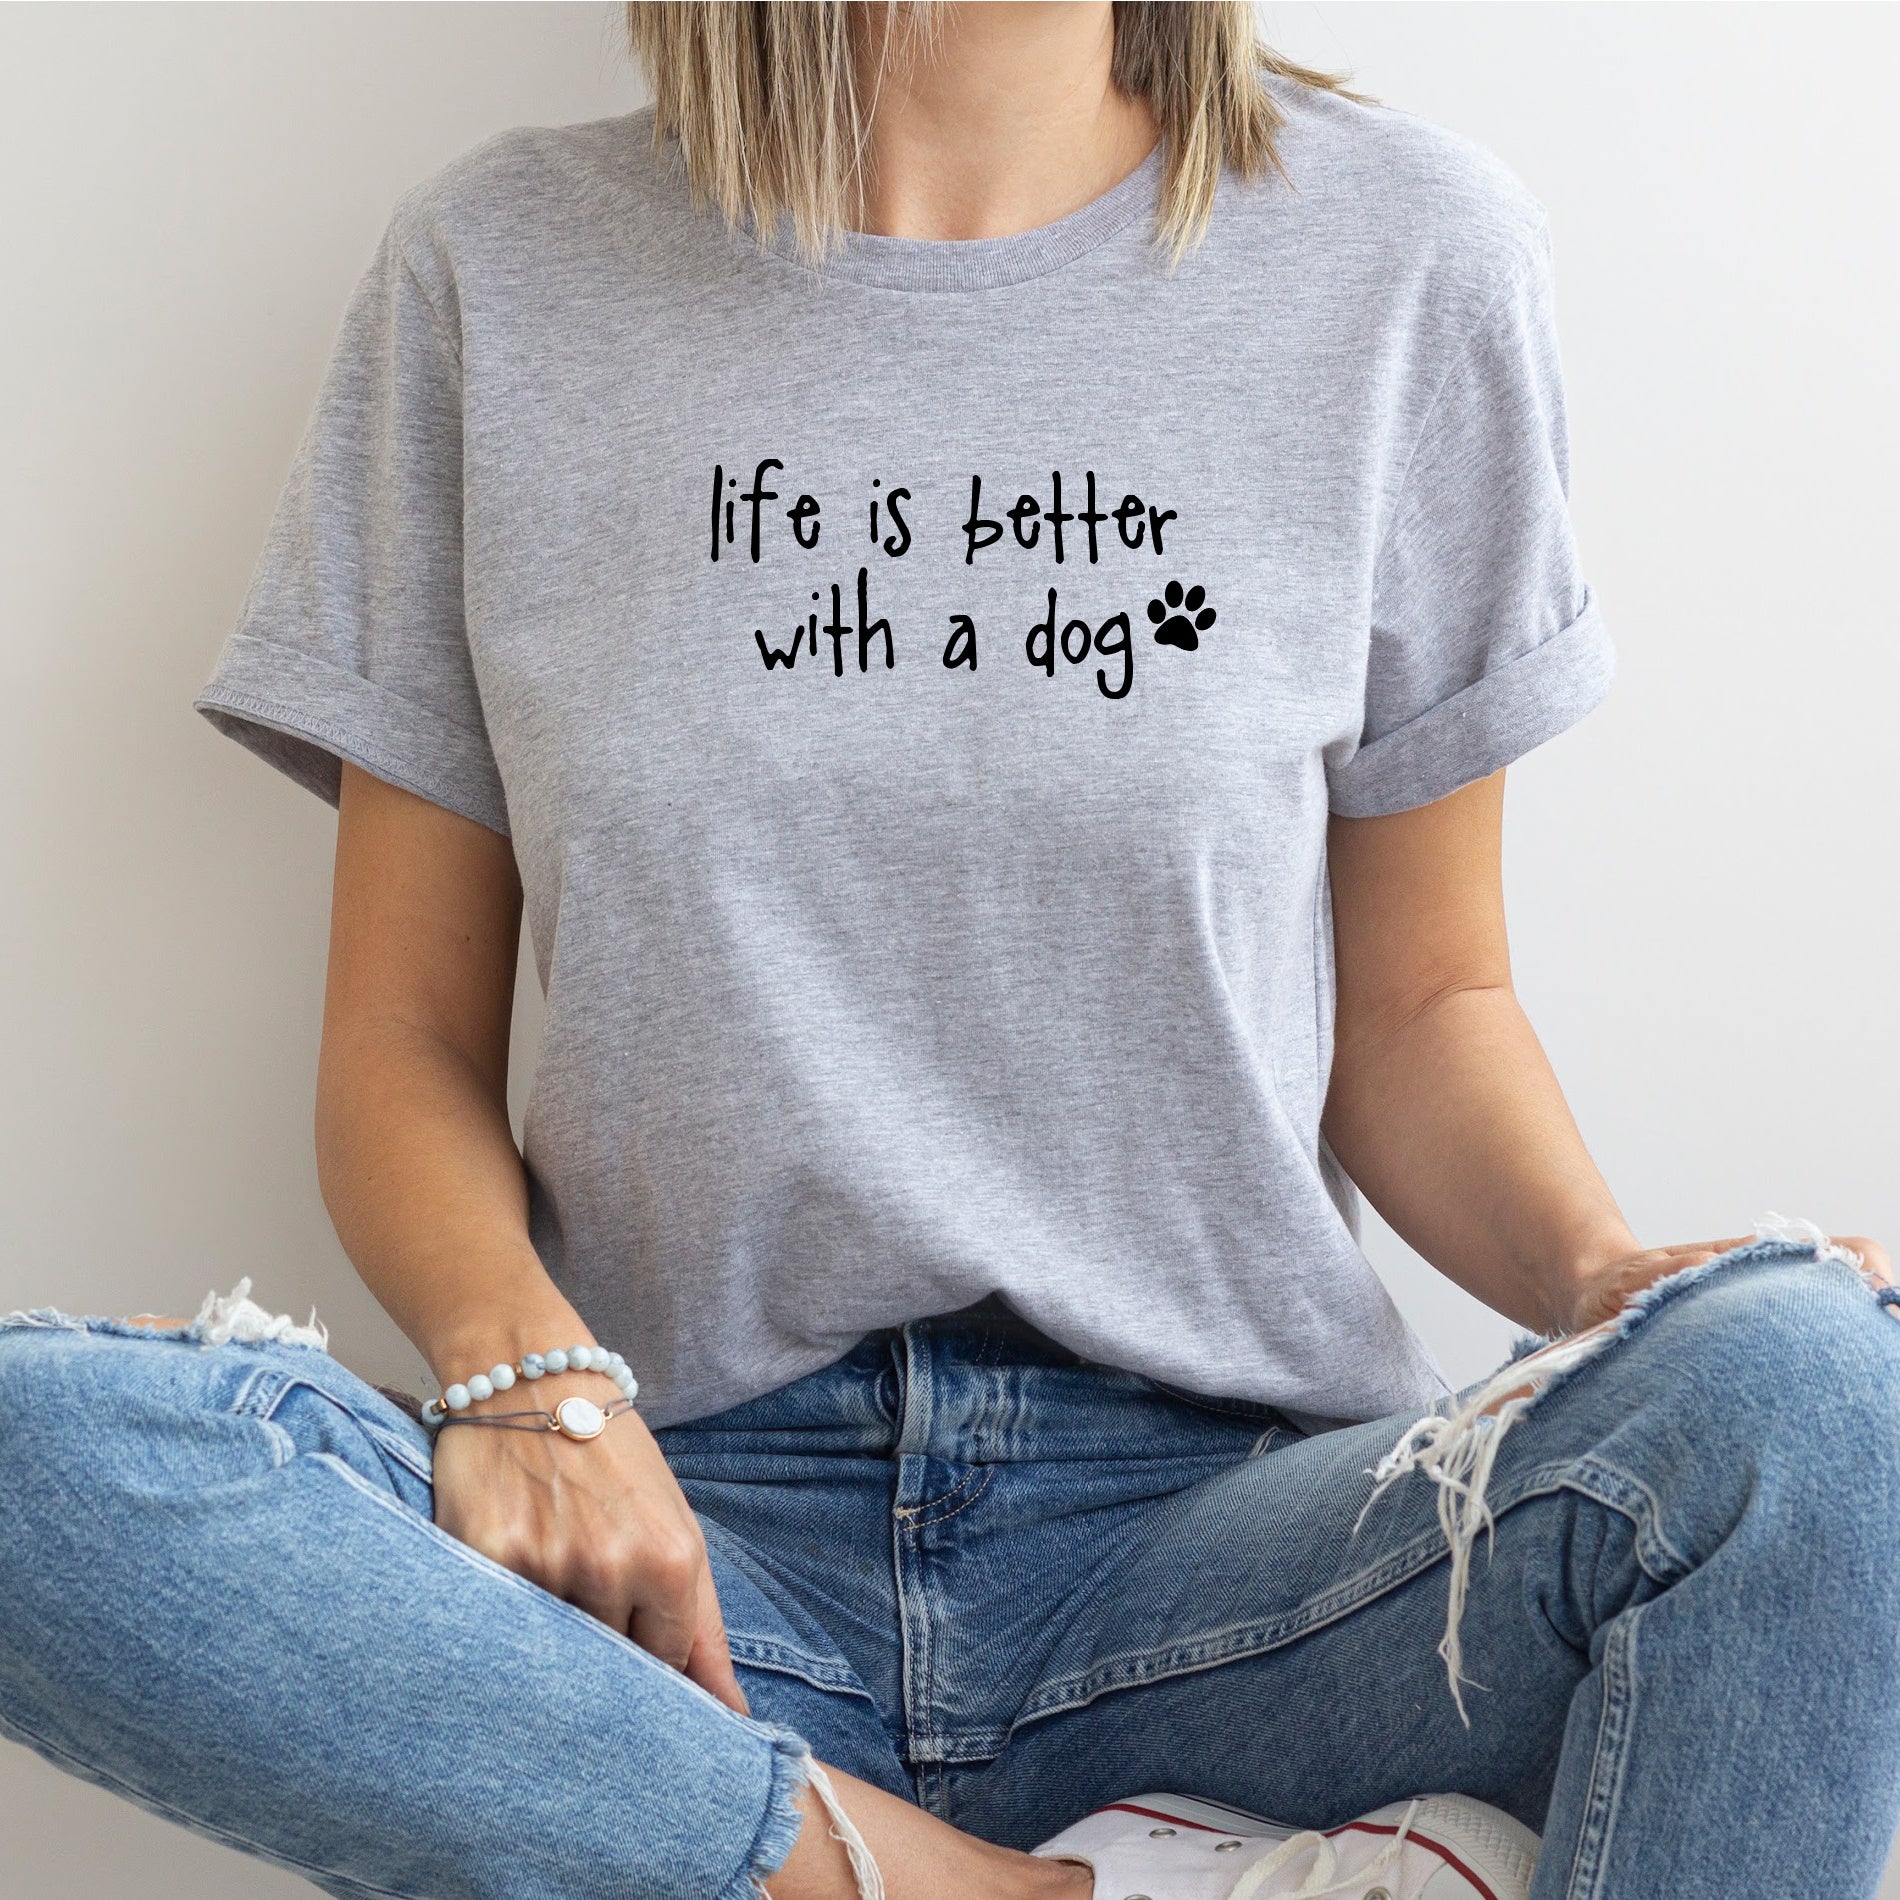 life is better with a dog grey t shirt